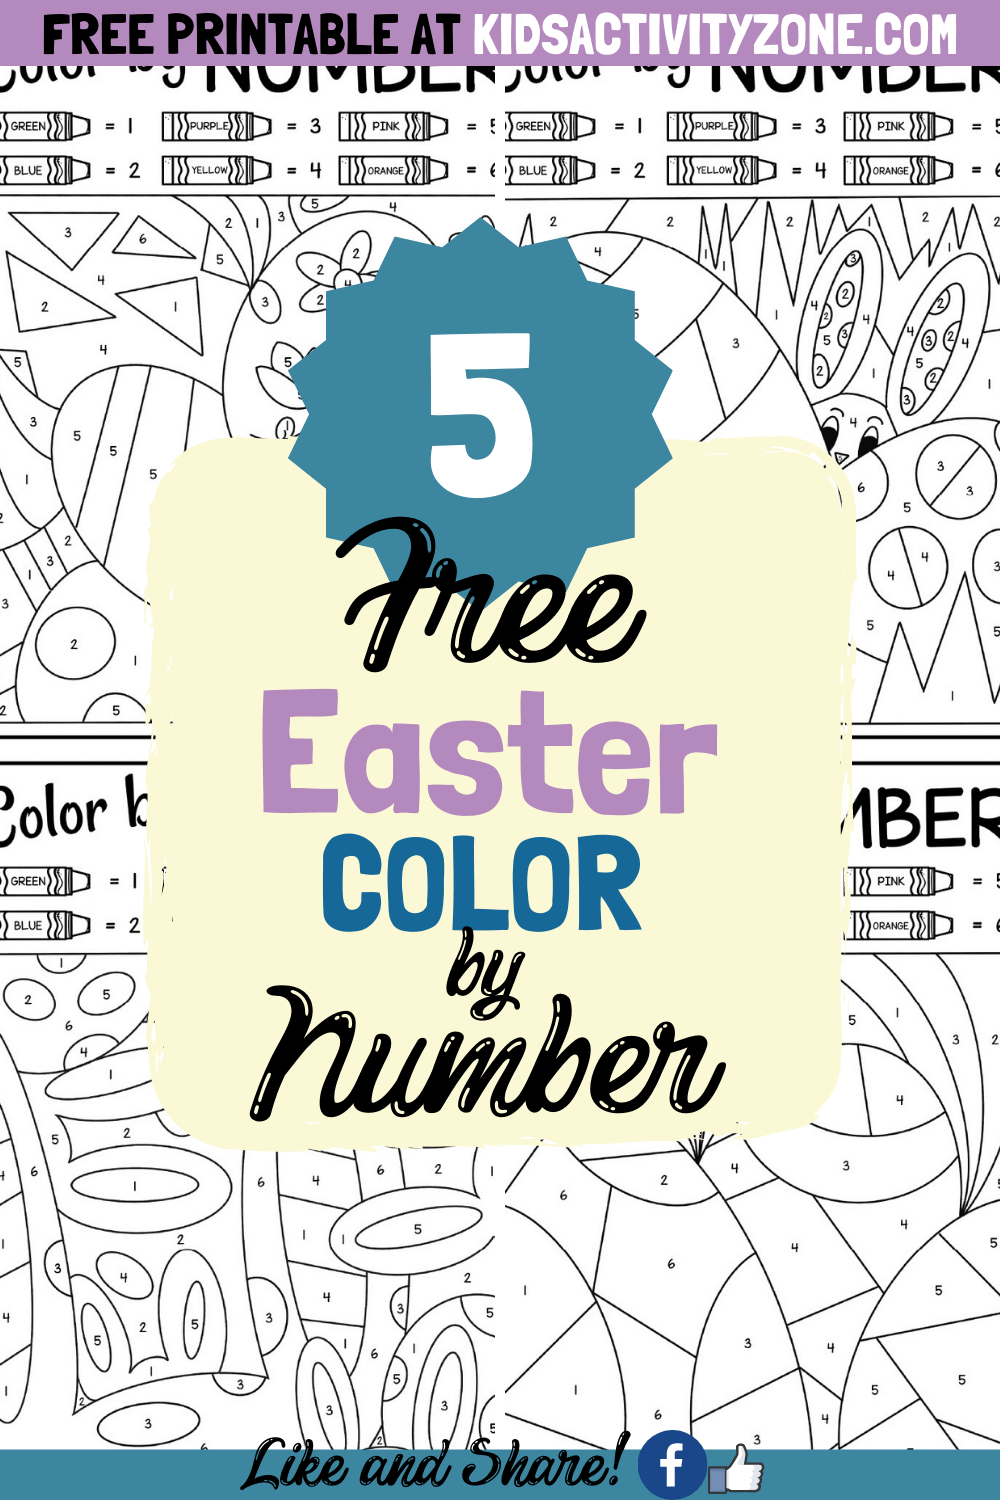 Free Easter Color by Number Pages are a fun, free Easter activity that kids love. Grab these free color by number pages and have fun coloring Easter pages!